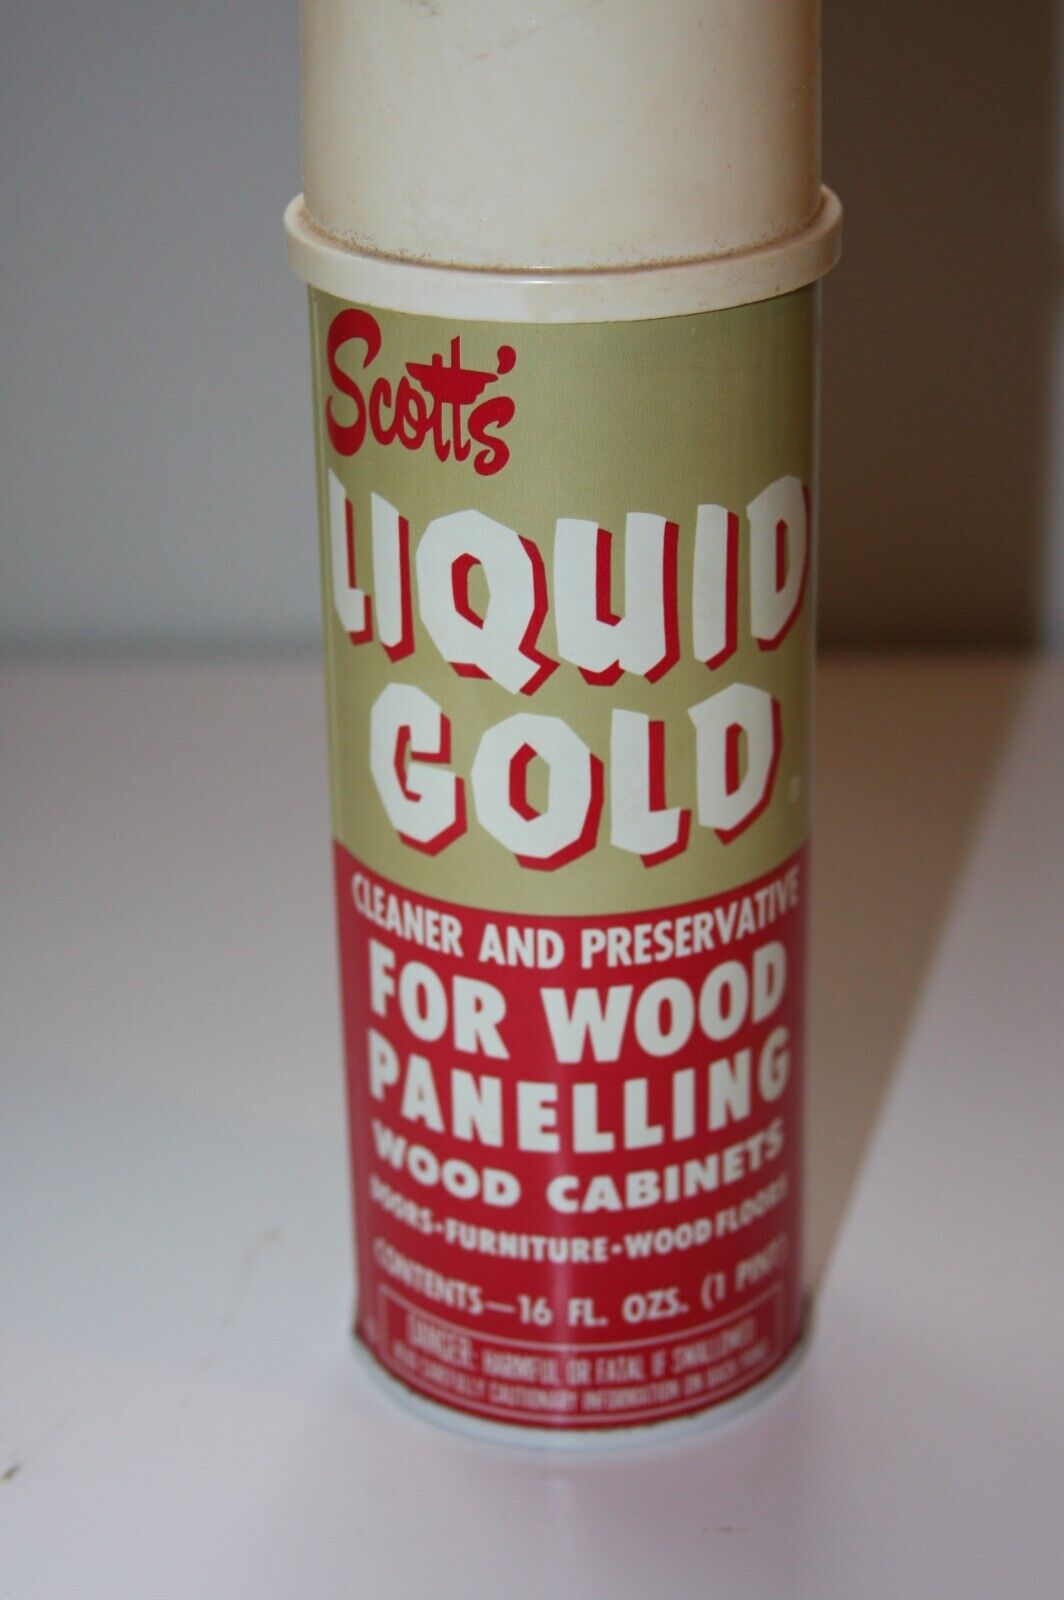 Vintage Scott's Liquid Gold Wood and Panelling Cleaner and Preserve Metal Can